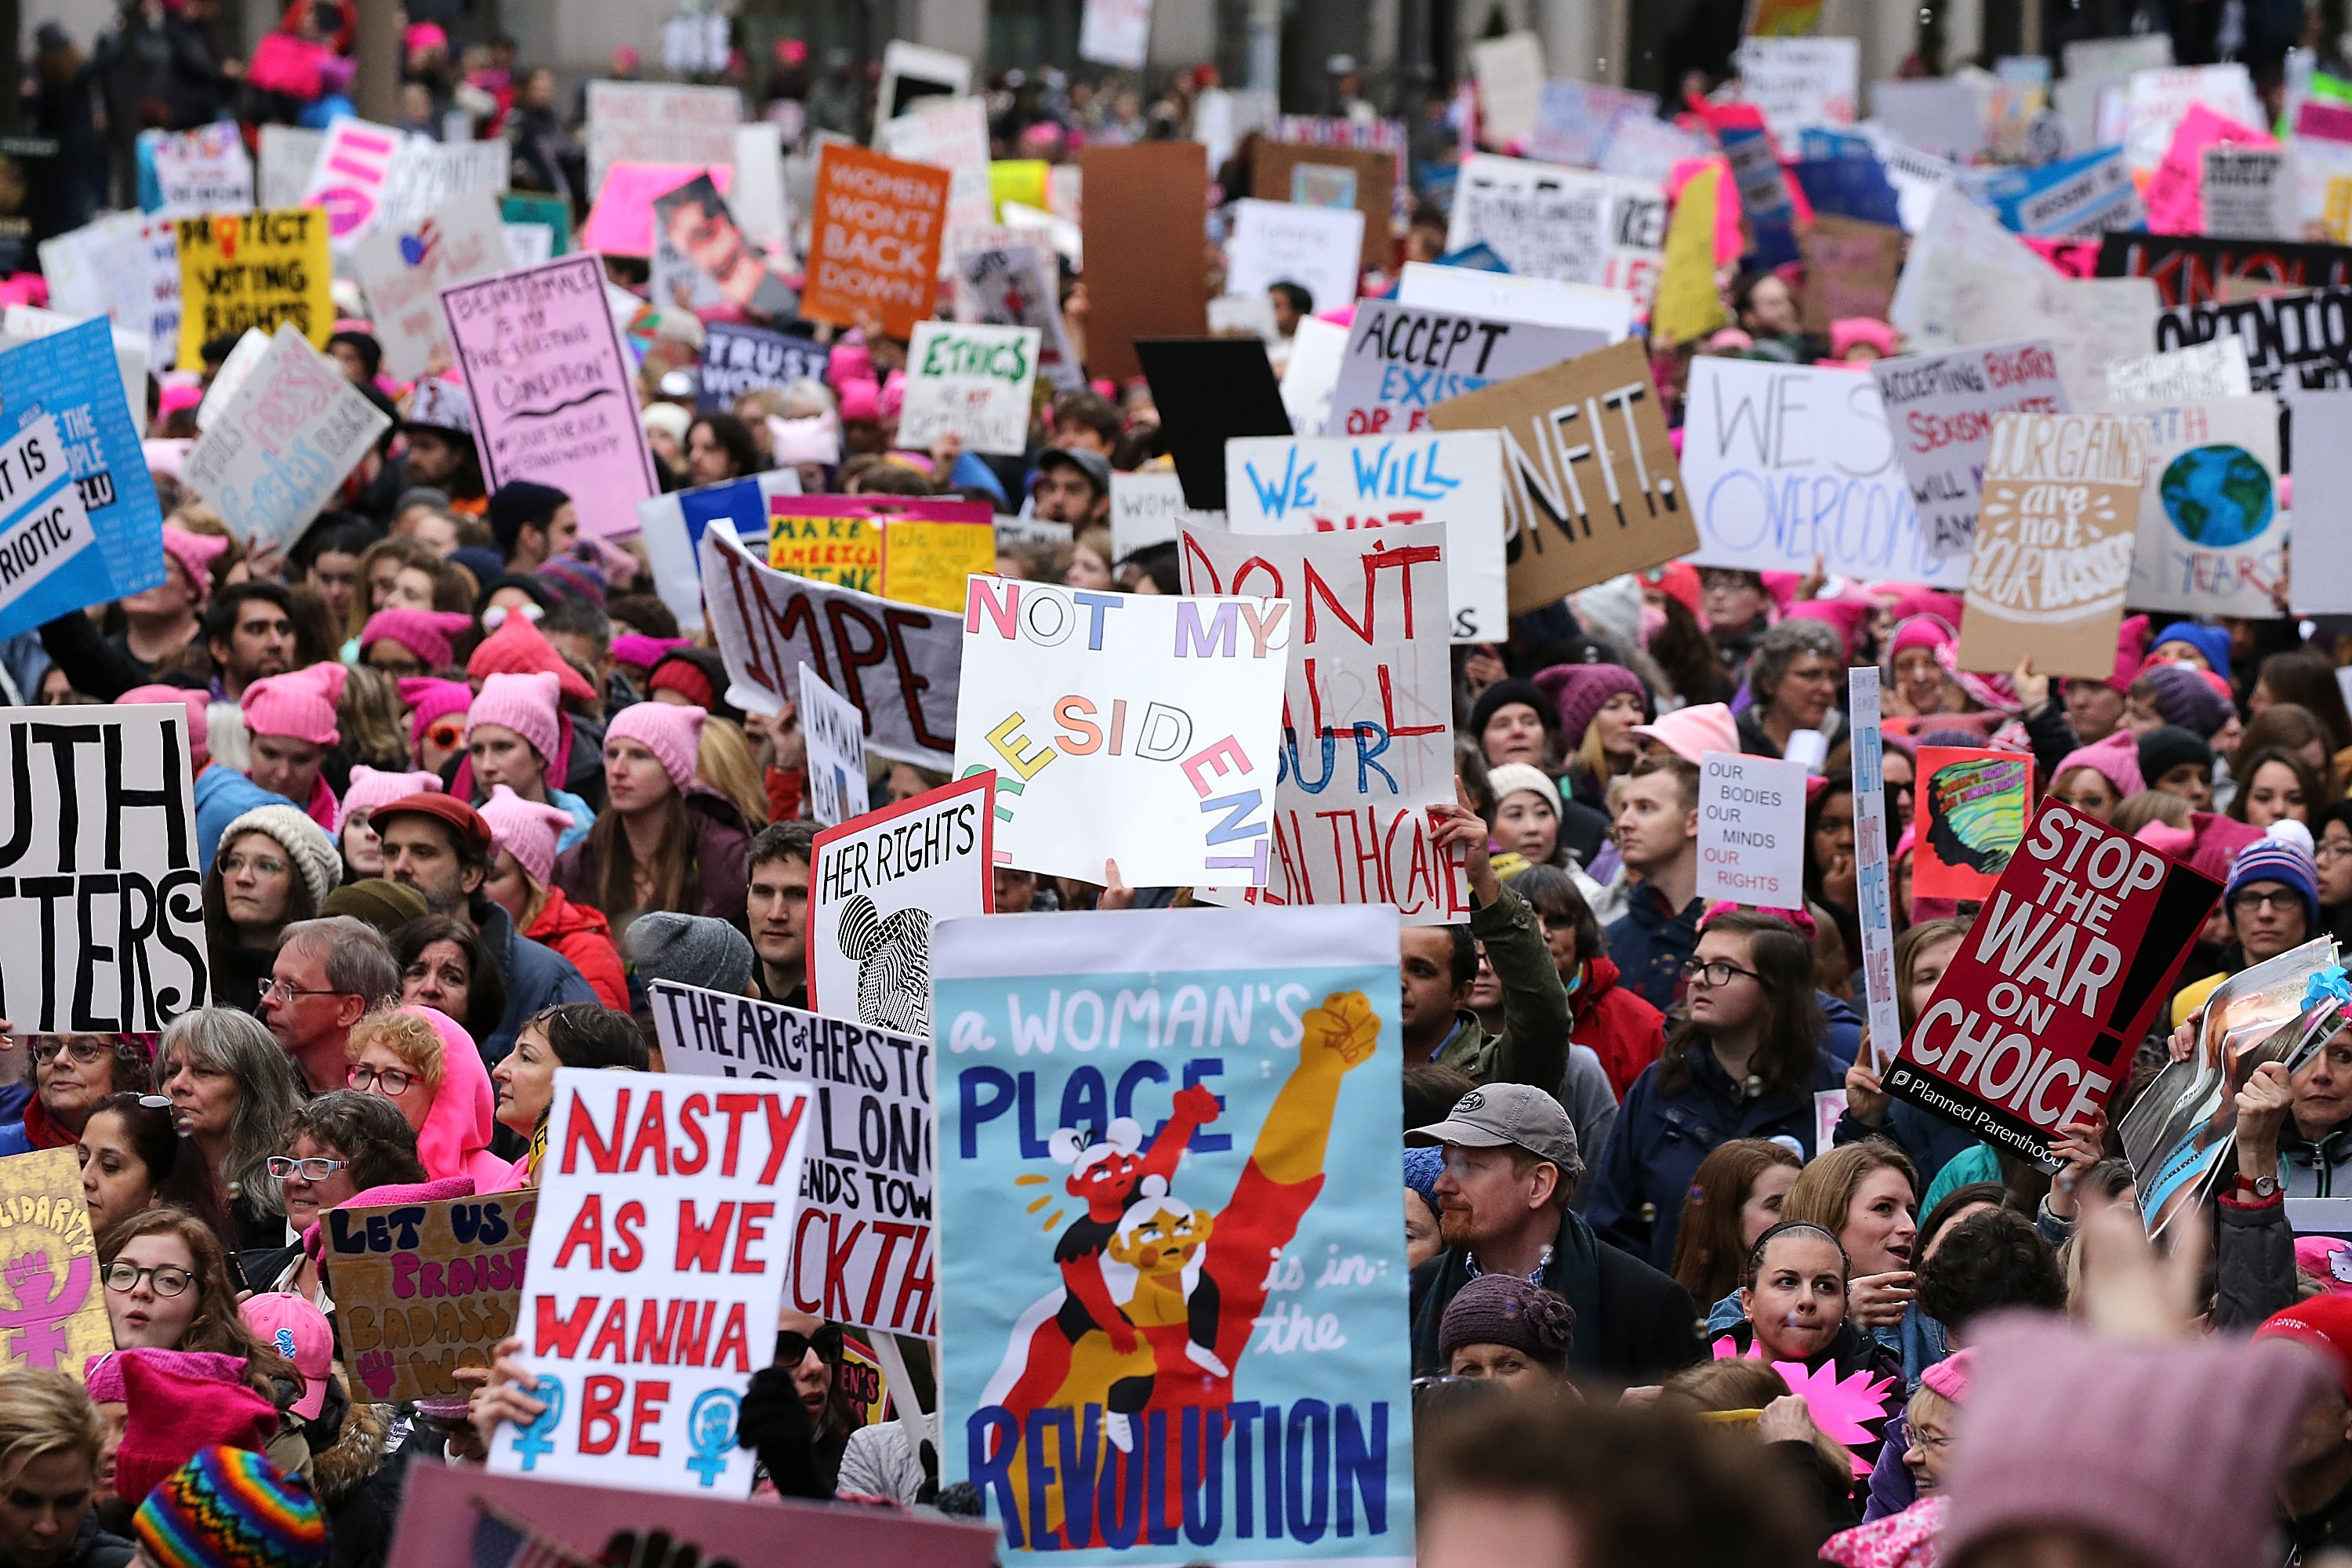 WASHINGTON, DC - JANUARY 21:  Protesters march on Pennsylvania Avenue during the Women's March on Washington on January 21, 2017 in Washington, DC.  (Photo by Paul Morigi/WireImage) (Paul Morigi&mdash;WireImage)